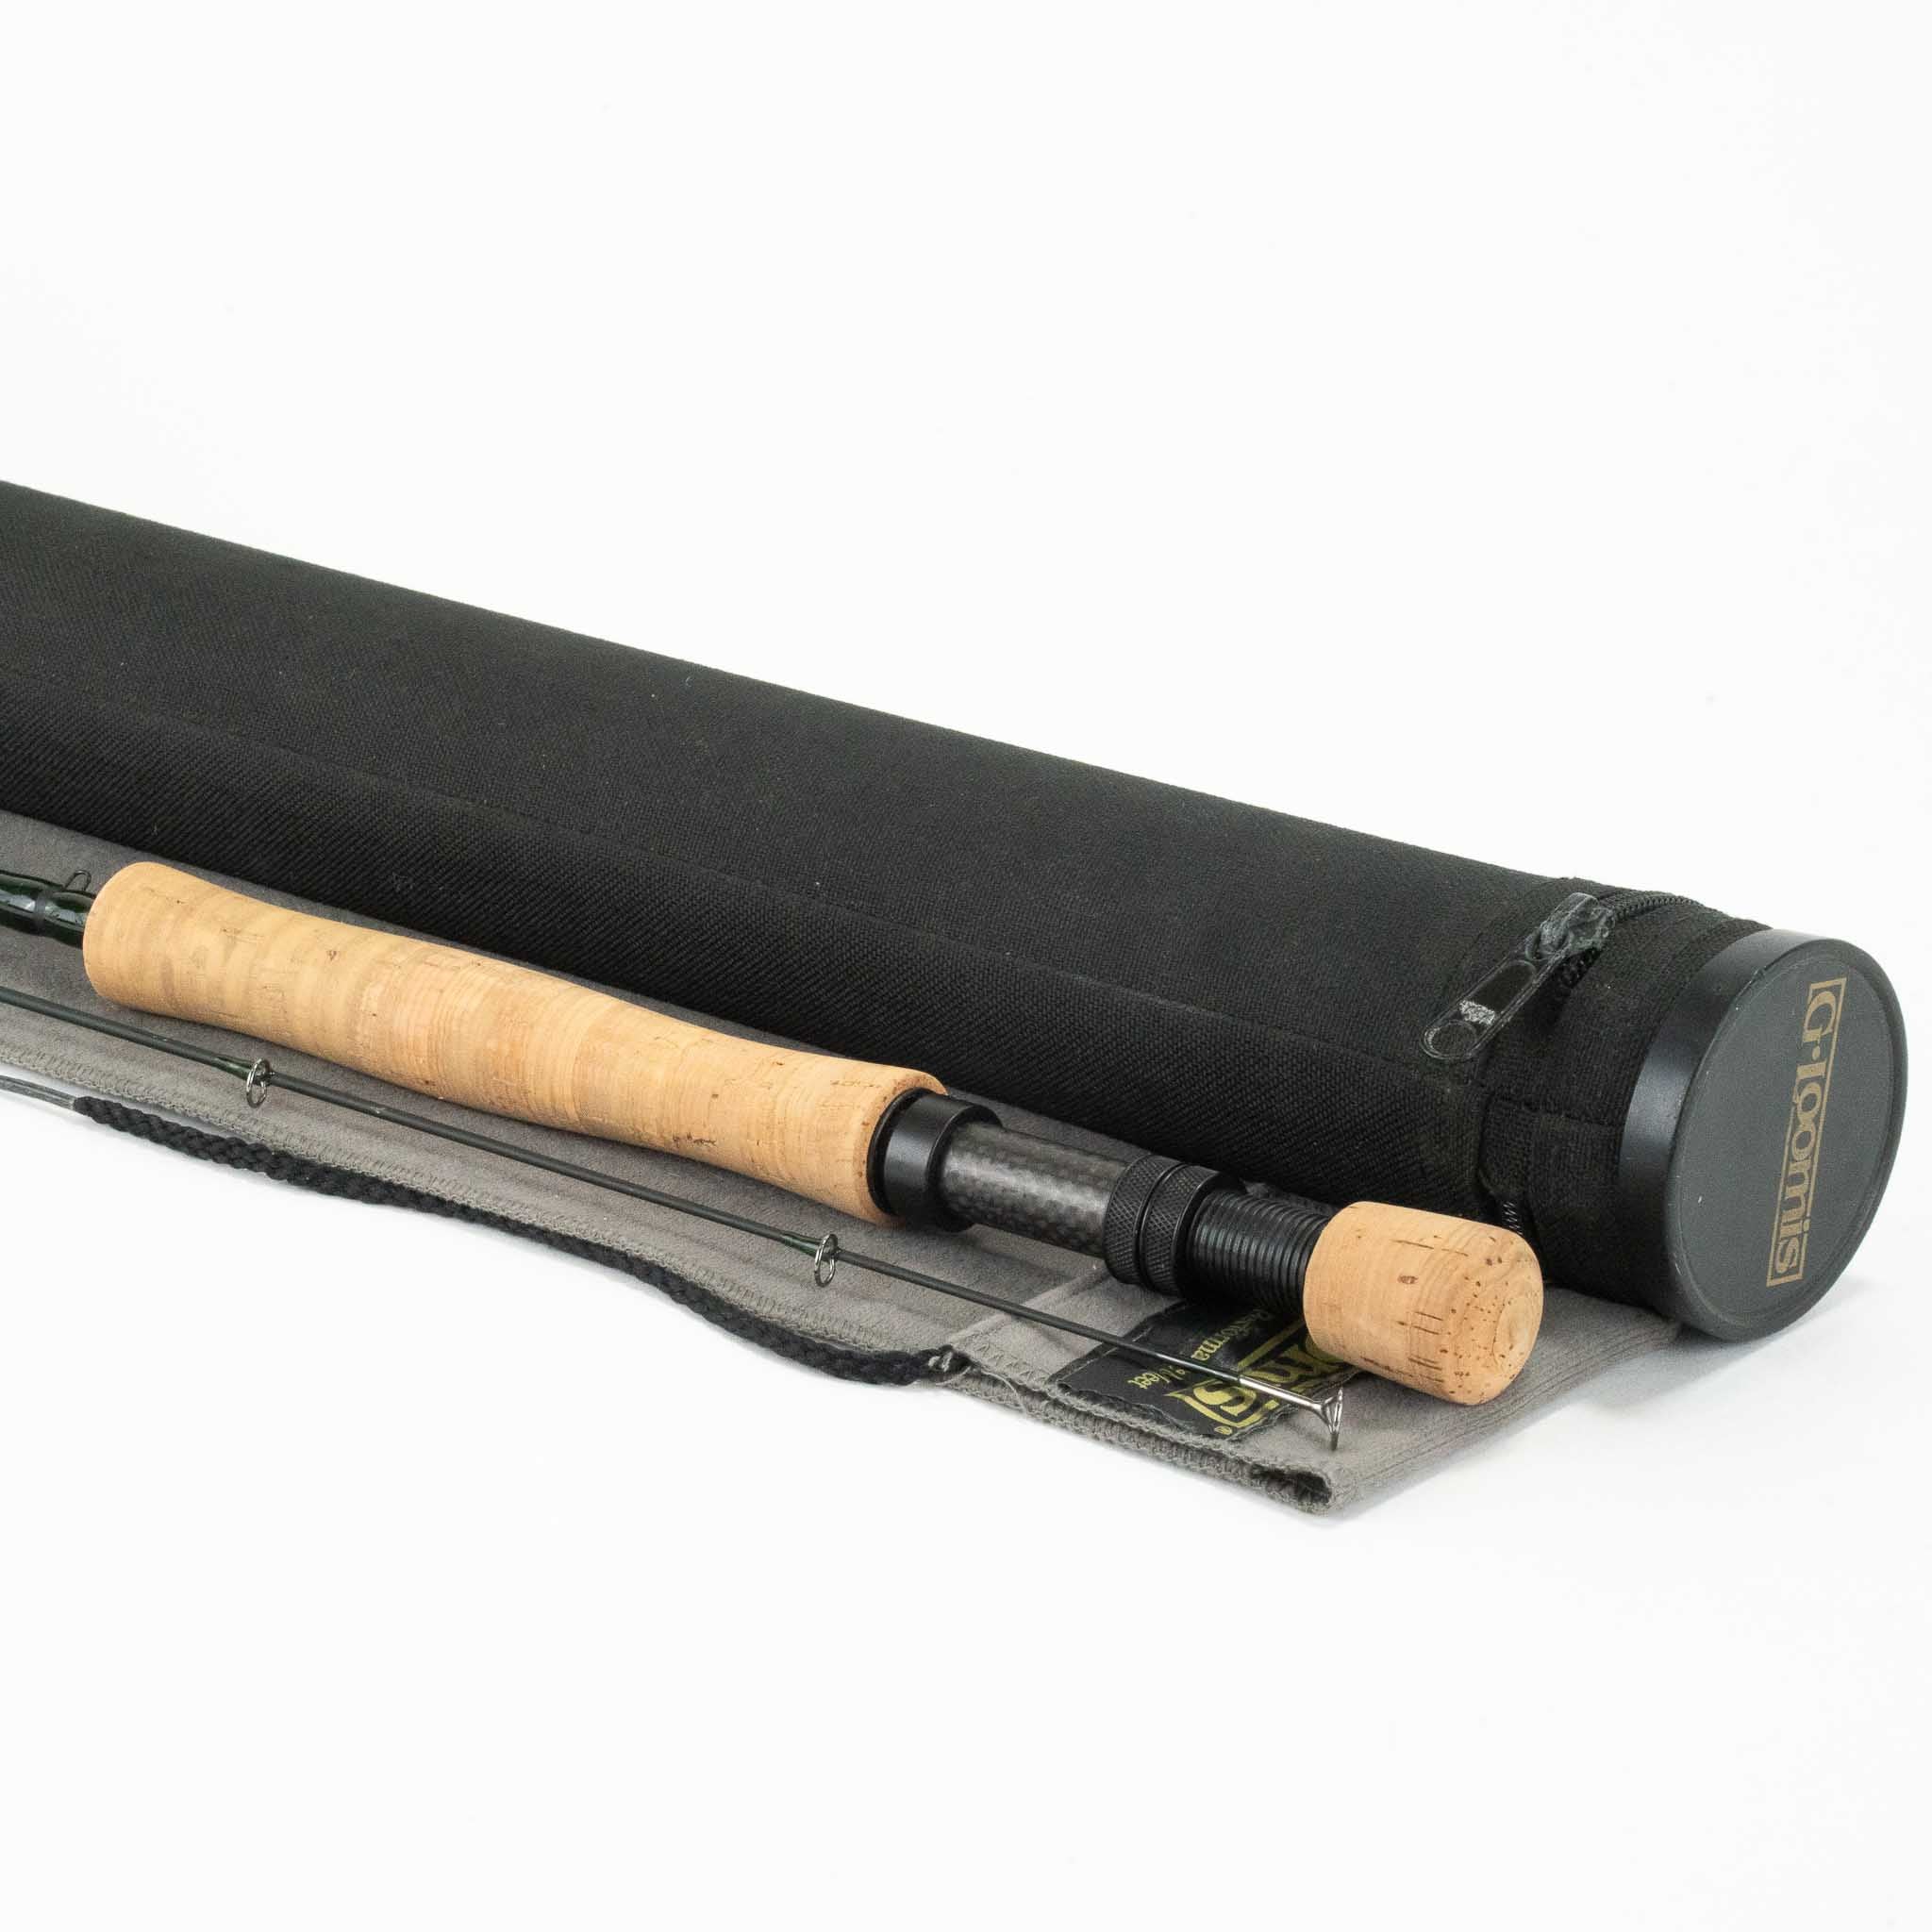 GLoomis GL4 990-2 Fly Rod - 9wt 9ft 0in 2pc – Outfishers